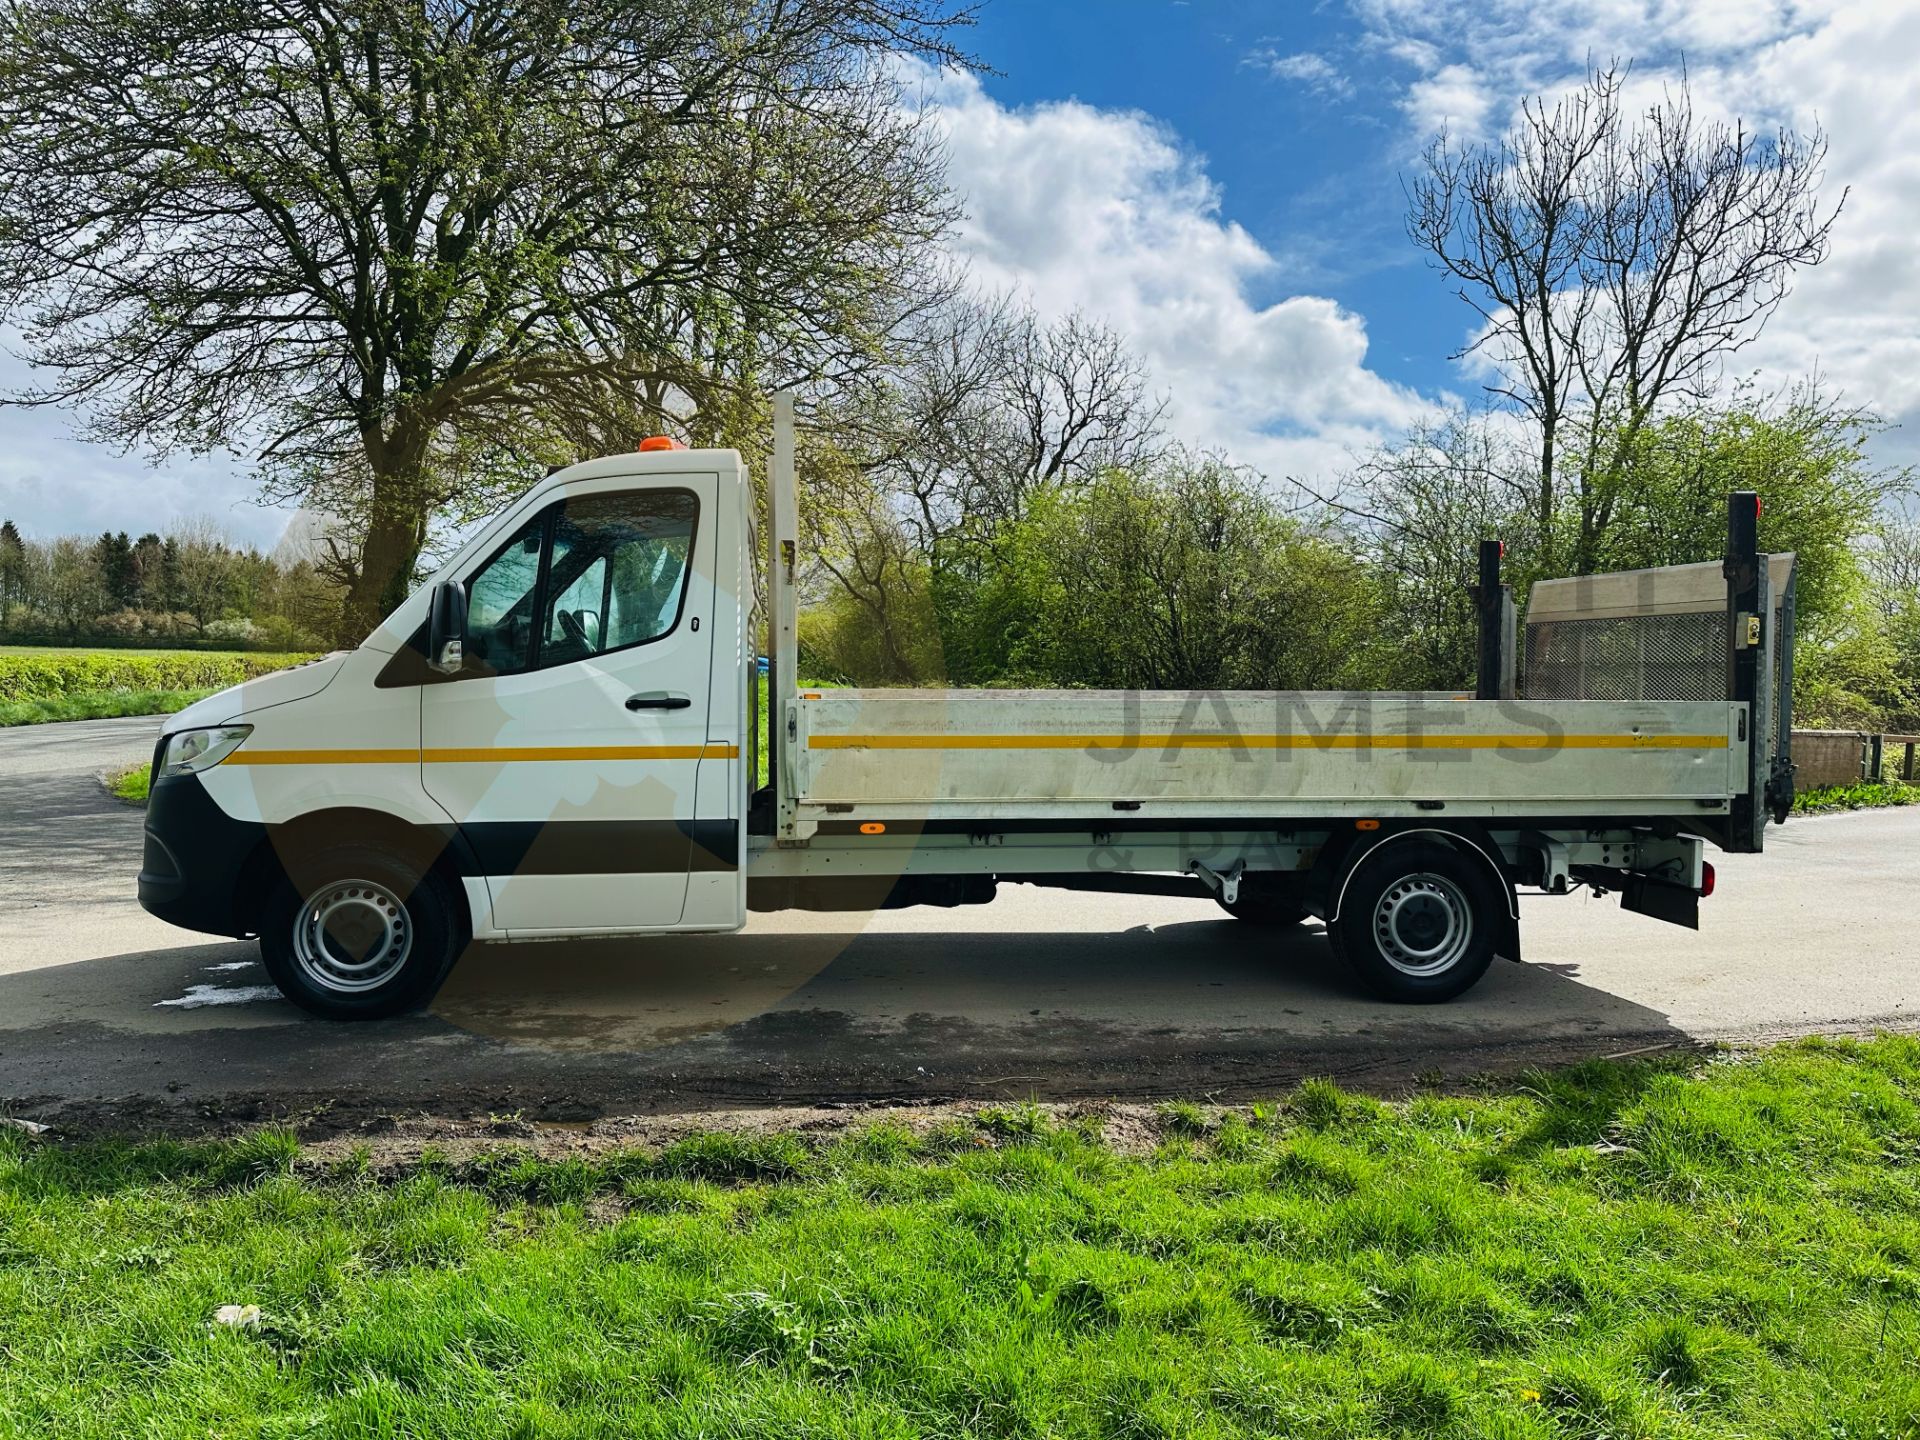 (On Sale) MERCEDES SPRINTER 316CDI 3.5T DROPSIDE TRUCK WITH ELECTRIC TAIL LIFT- 2020 MODEL - FSH - Image 6 of 30